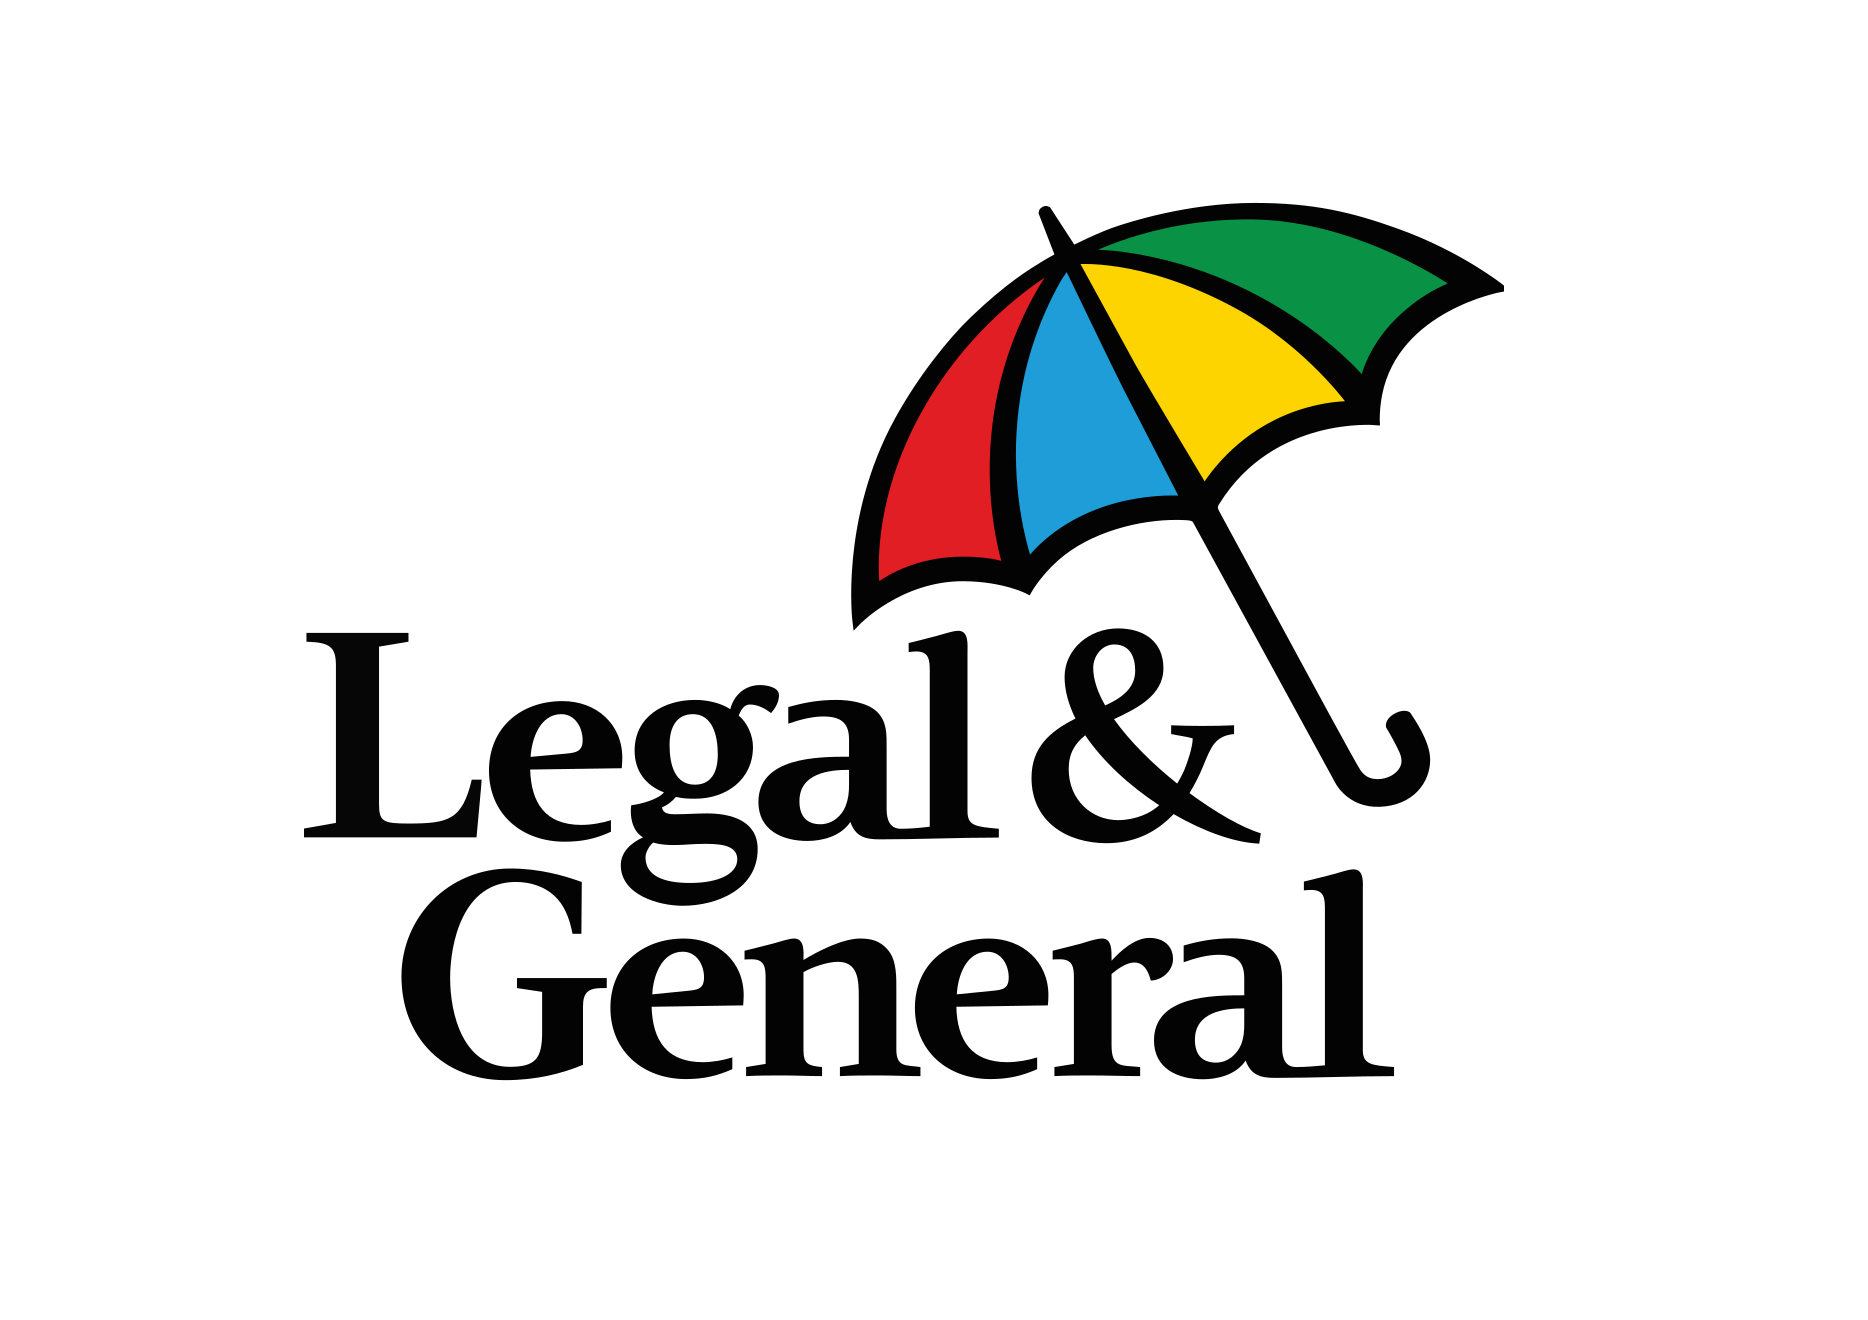 Legal & General completes £930mn pension buy-in with Tate & Lyle